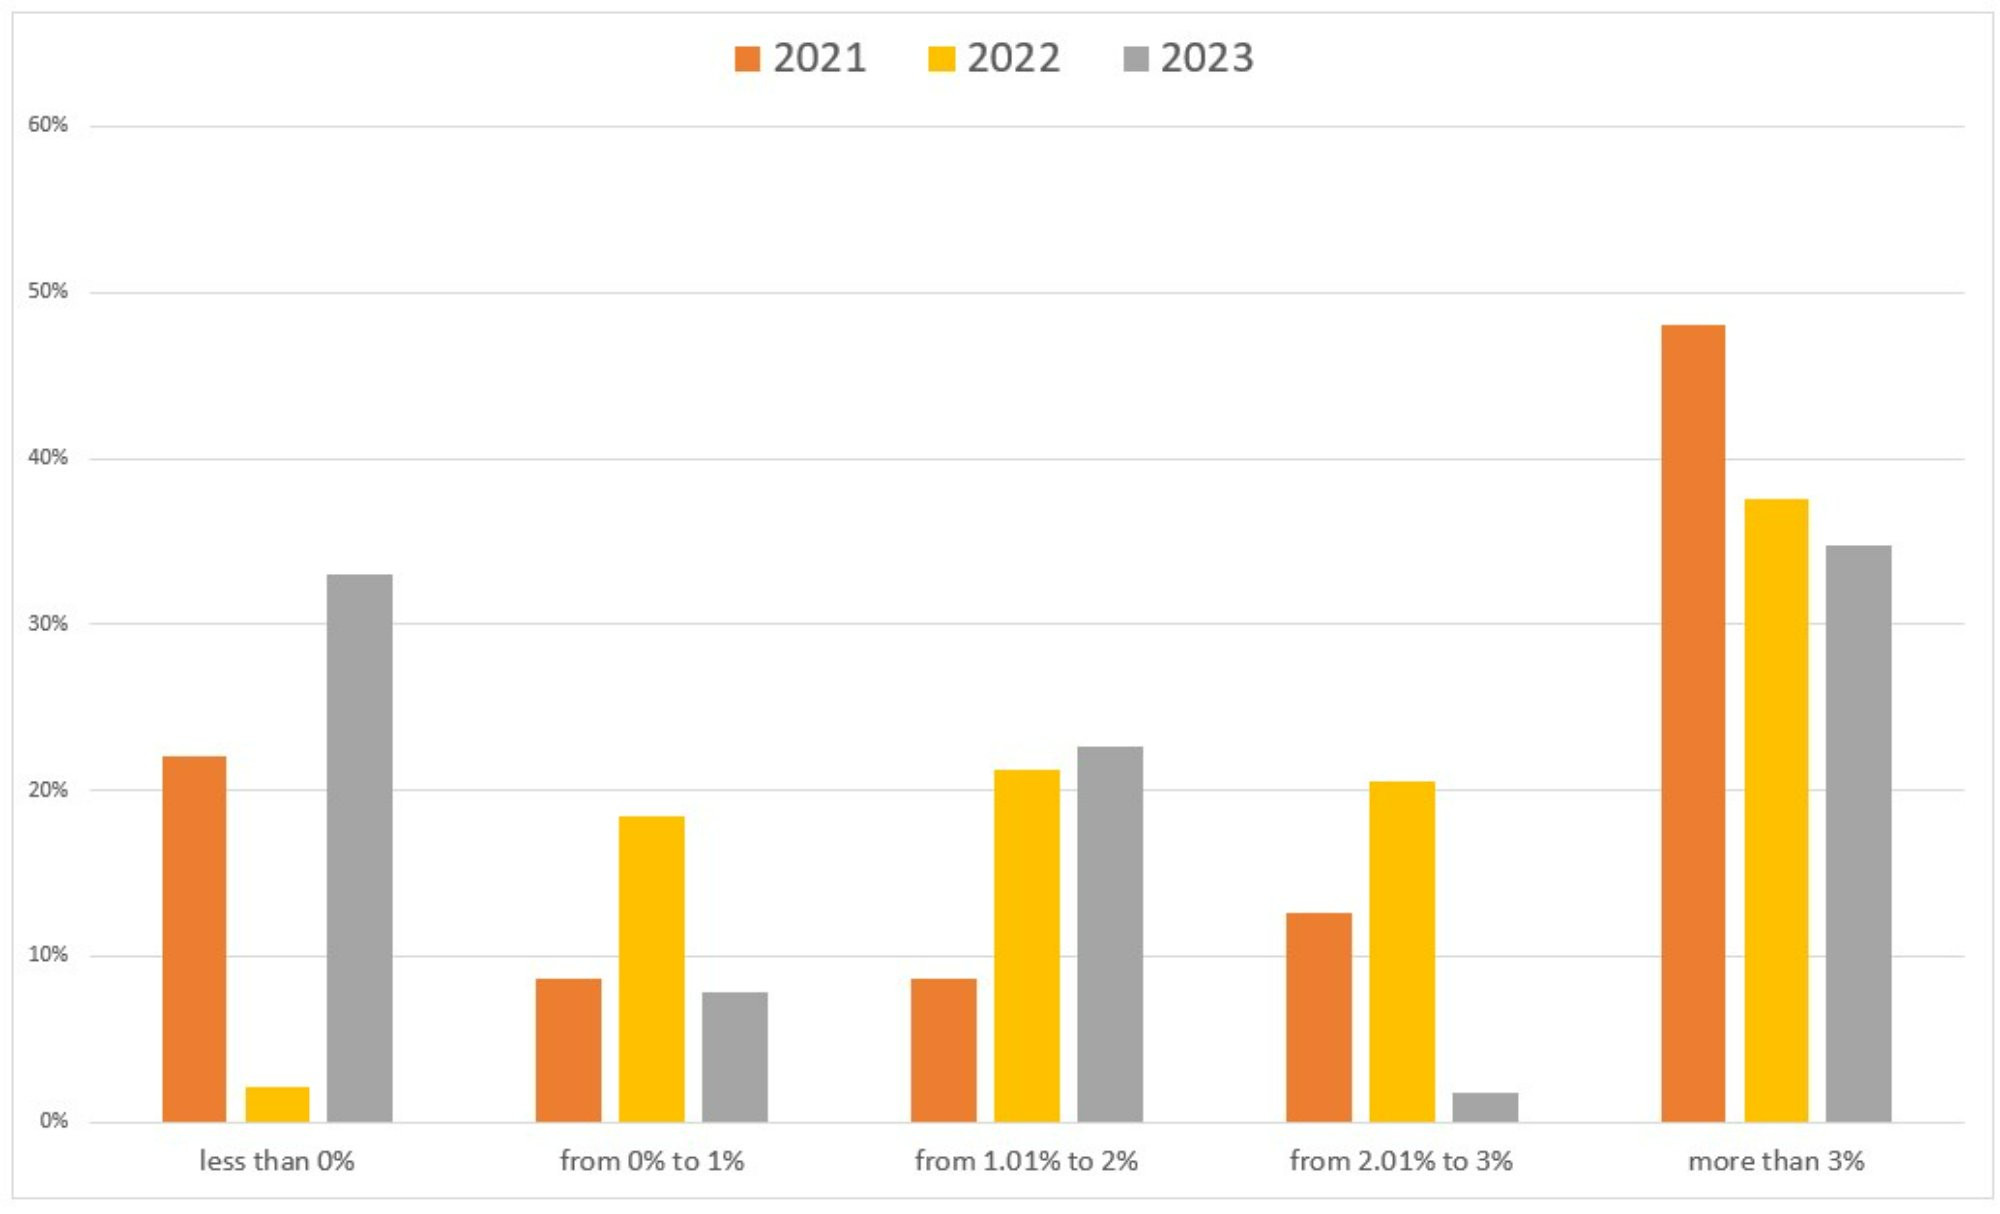 Percentage changes expected in employment for KOMA in 2023